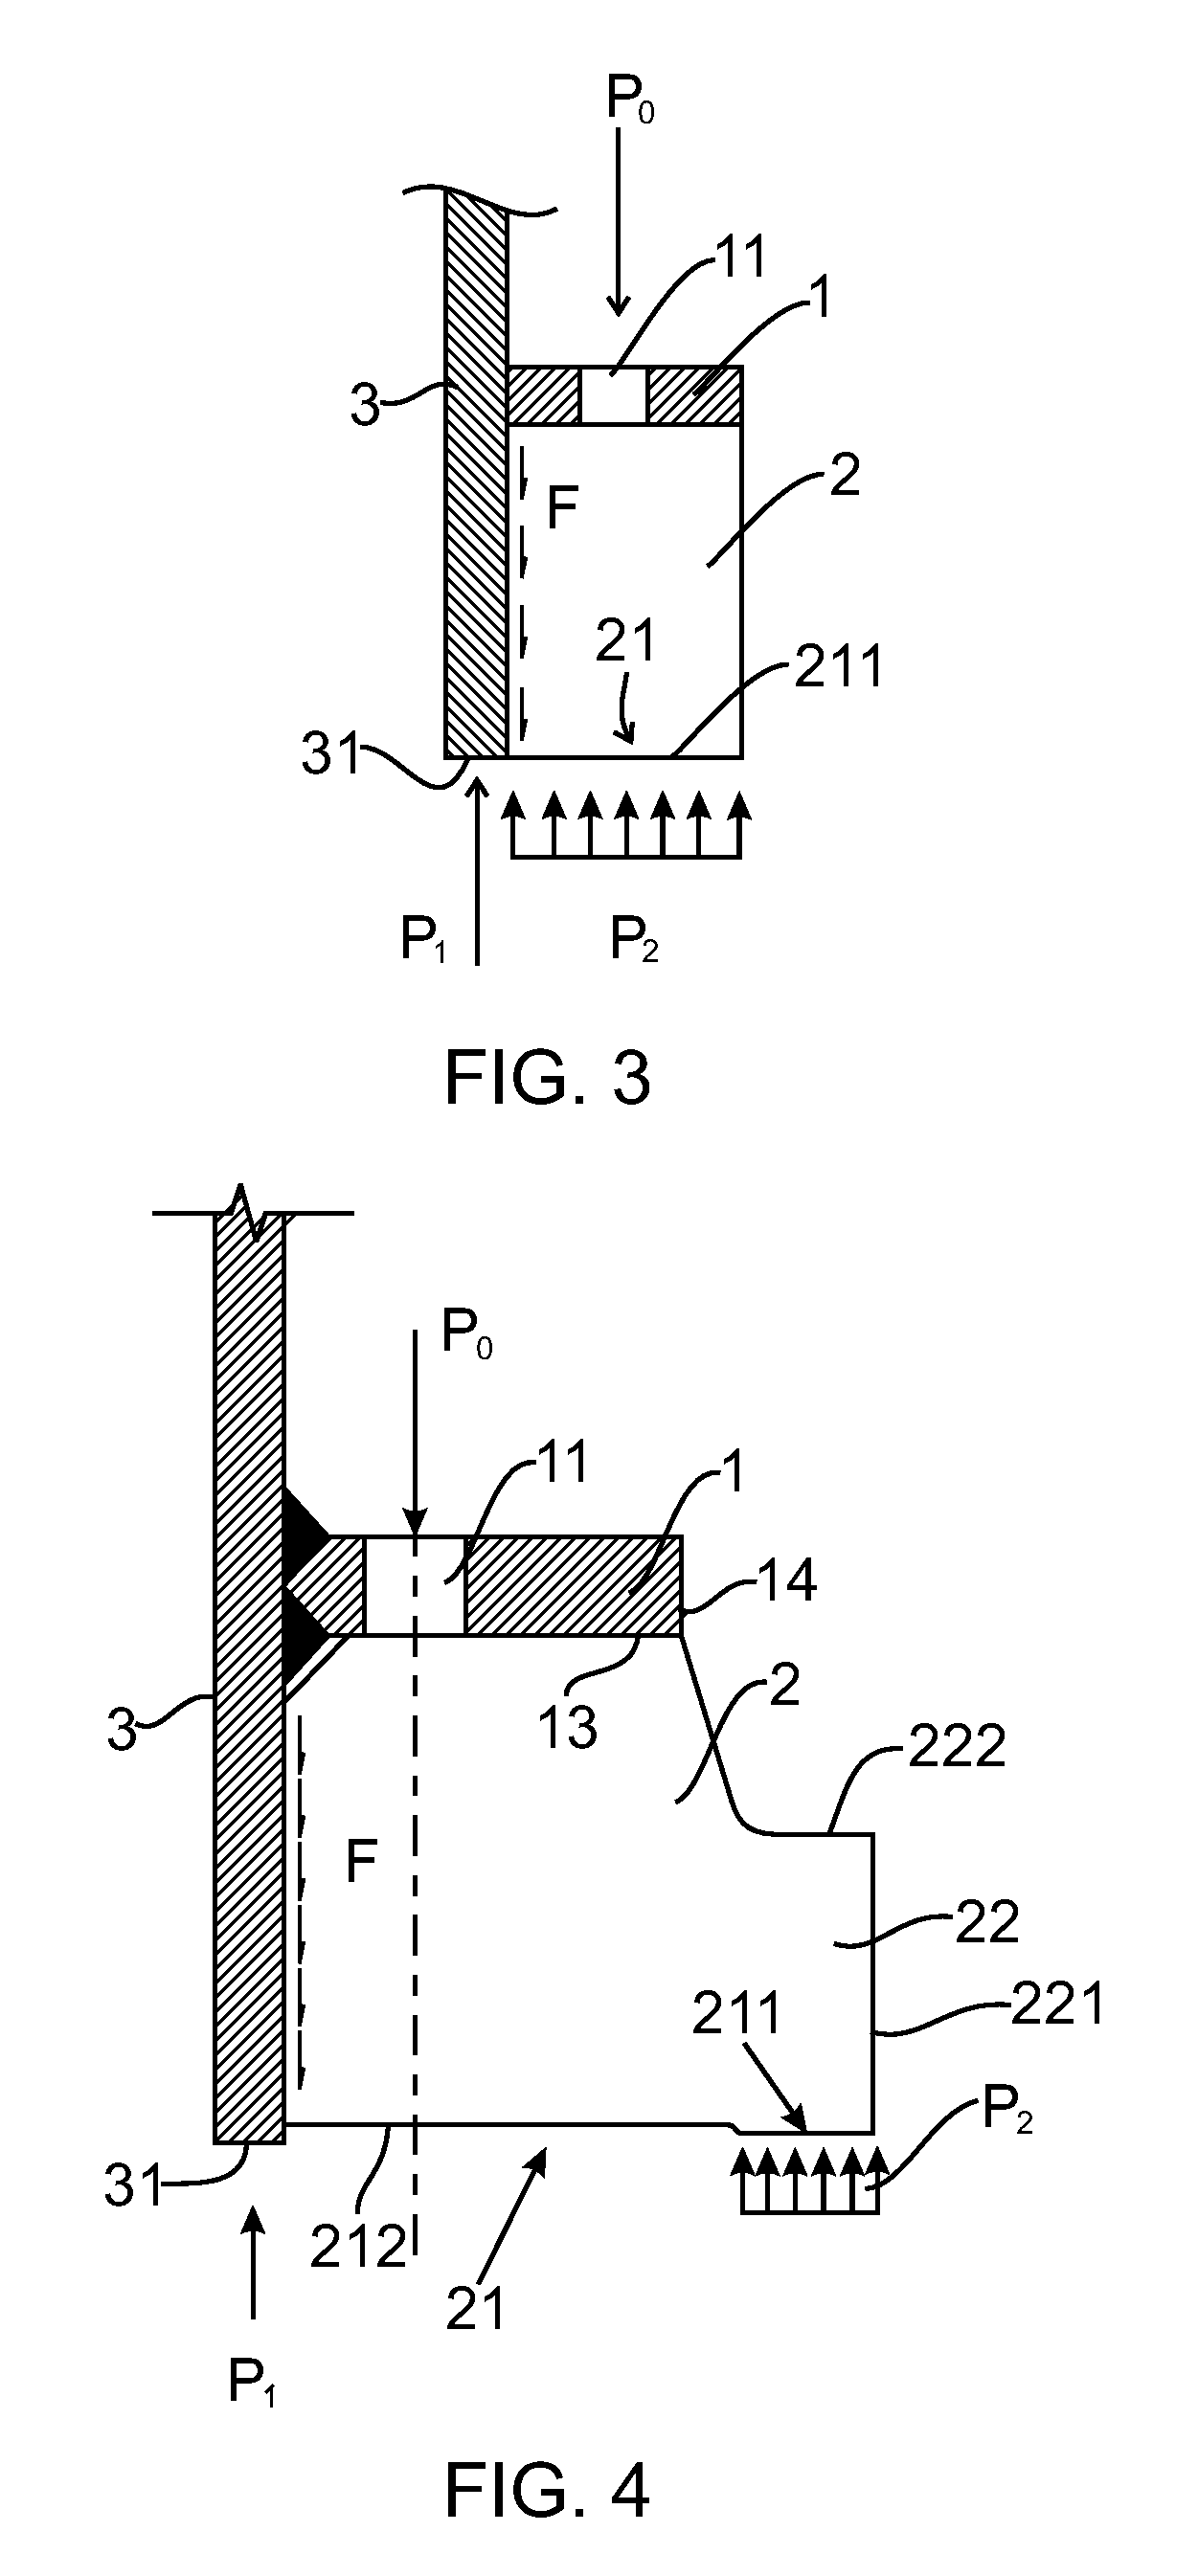 Coupling flange assembly for connecting steel pipes